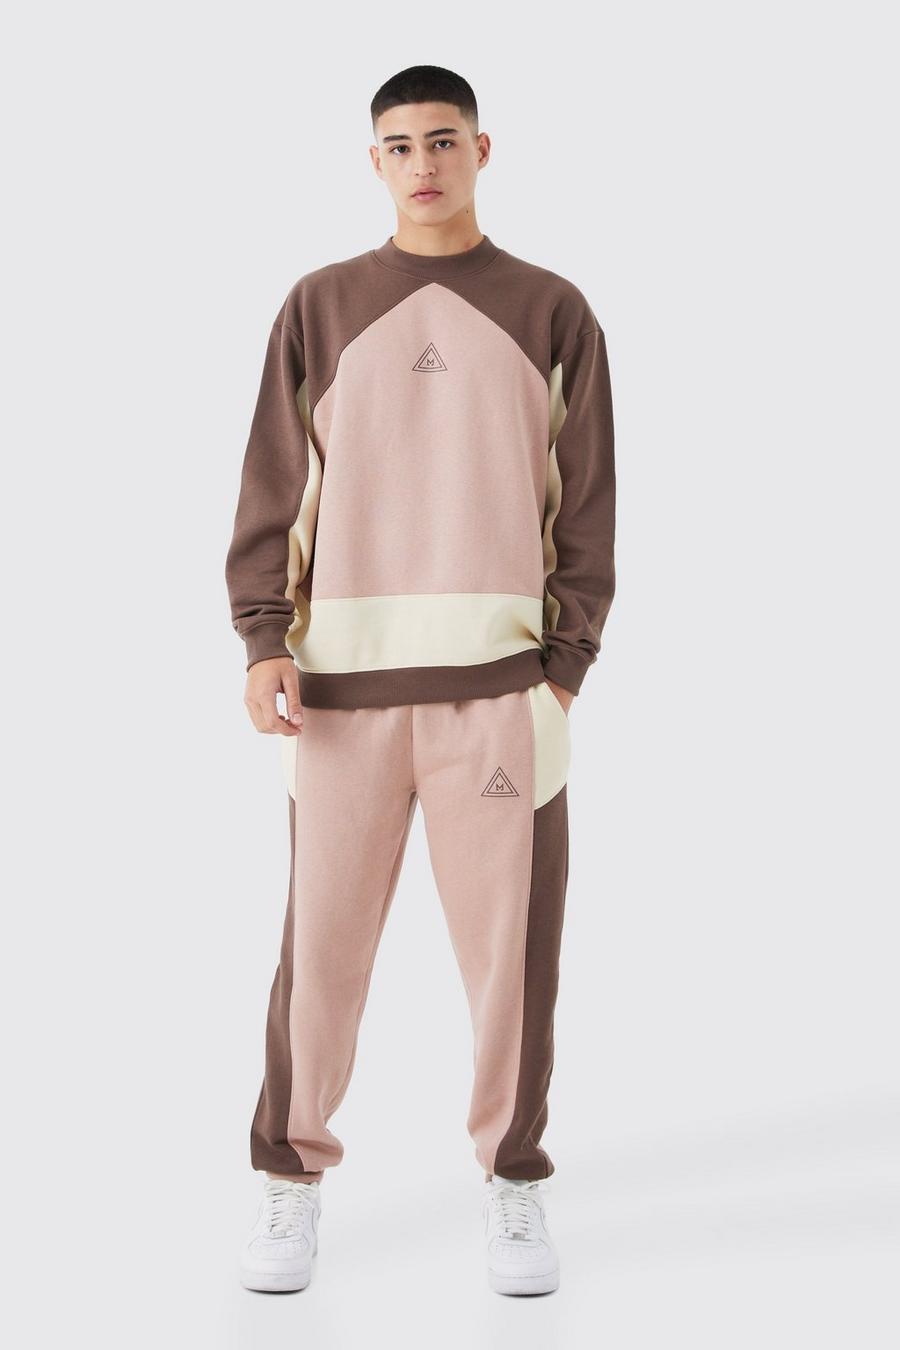 Chocolate brown Oversized Extended Neck Colour Block Sweatshirt Tracksuit